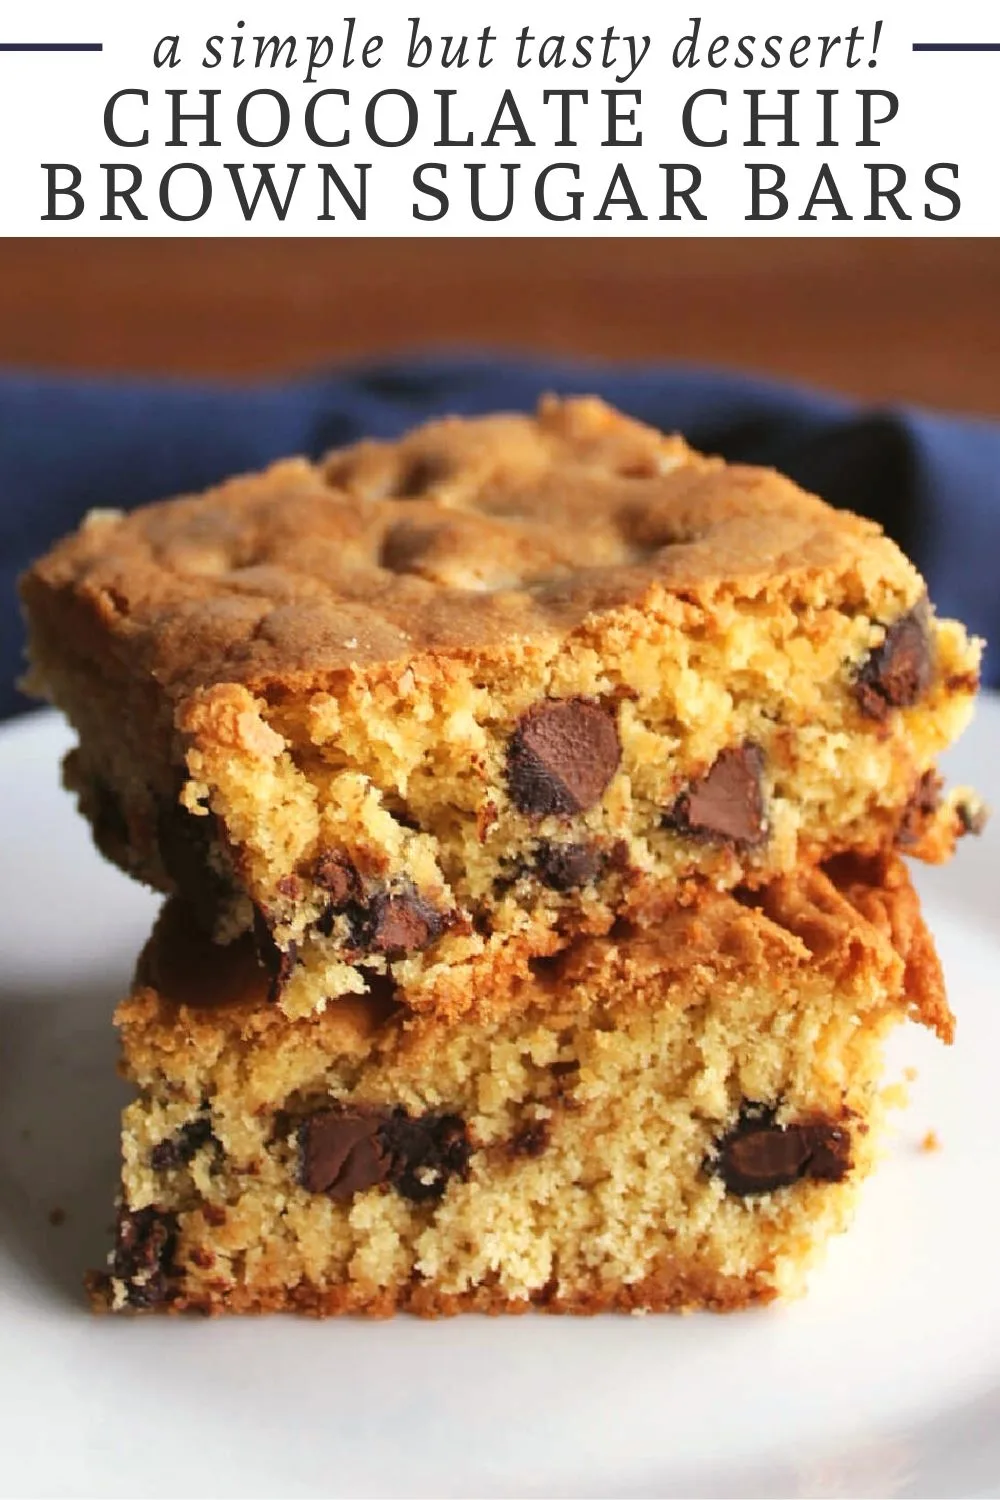 Tasty chocolate chip brown sugar bars are the answer any time you need a simple but delicious treat. These bars are lightly golden brown and soft and chewy when you bite into them.  The chocolate chips add that extra layer of goodness. Together they make a great dessert.